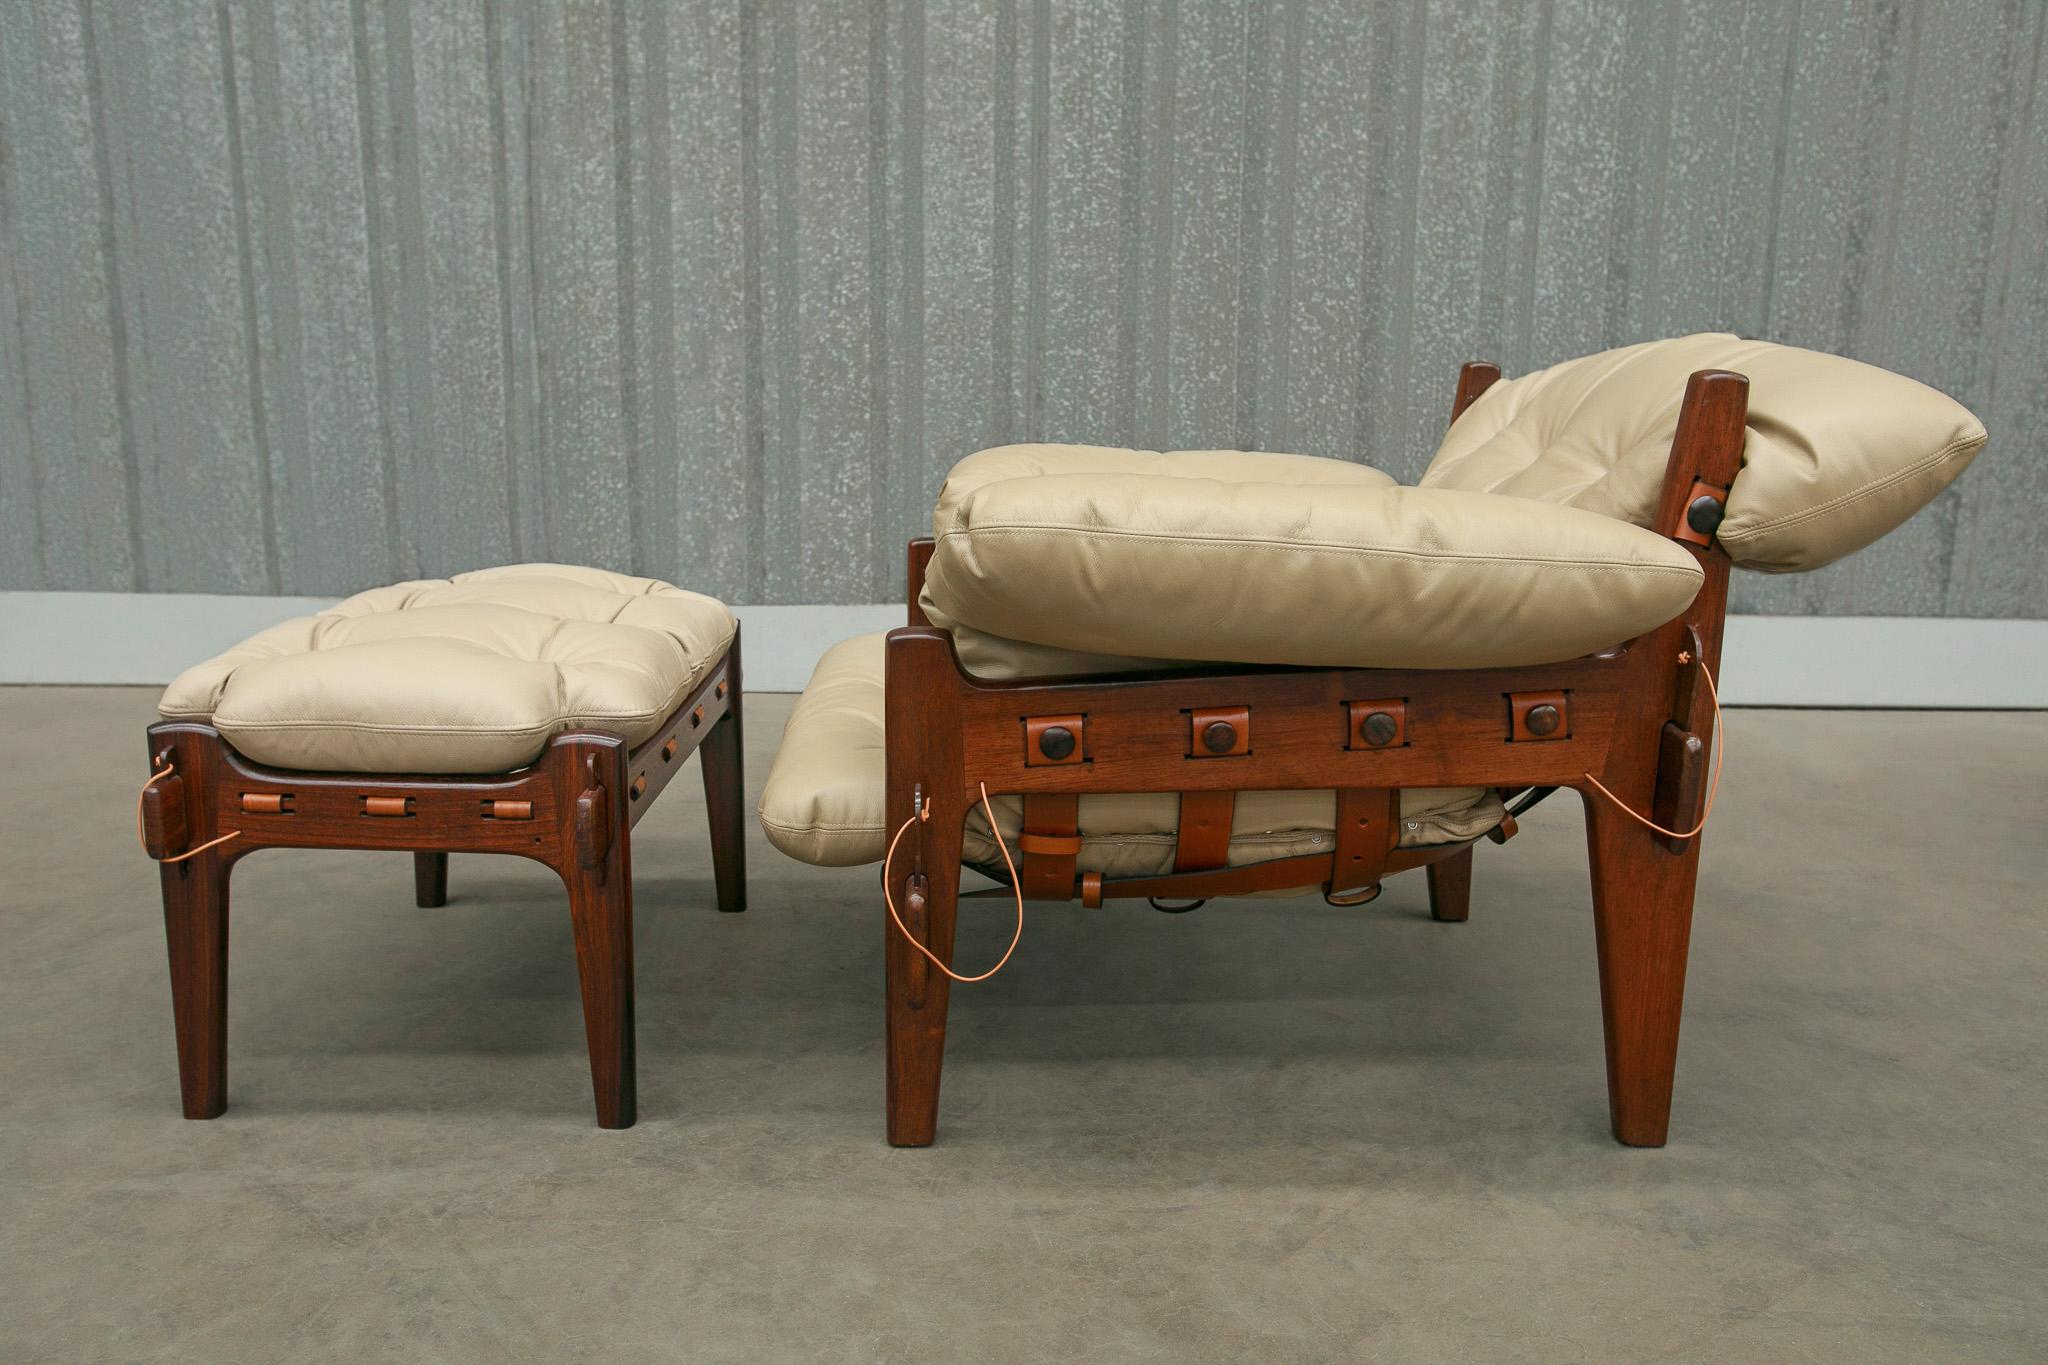 Hand-Crafted “Moleca” Lounge Chair with Stool in Hardwood & Leather, Sergio Rodrigues, Brazil For Sale